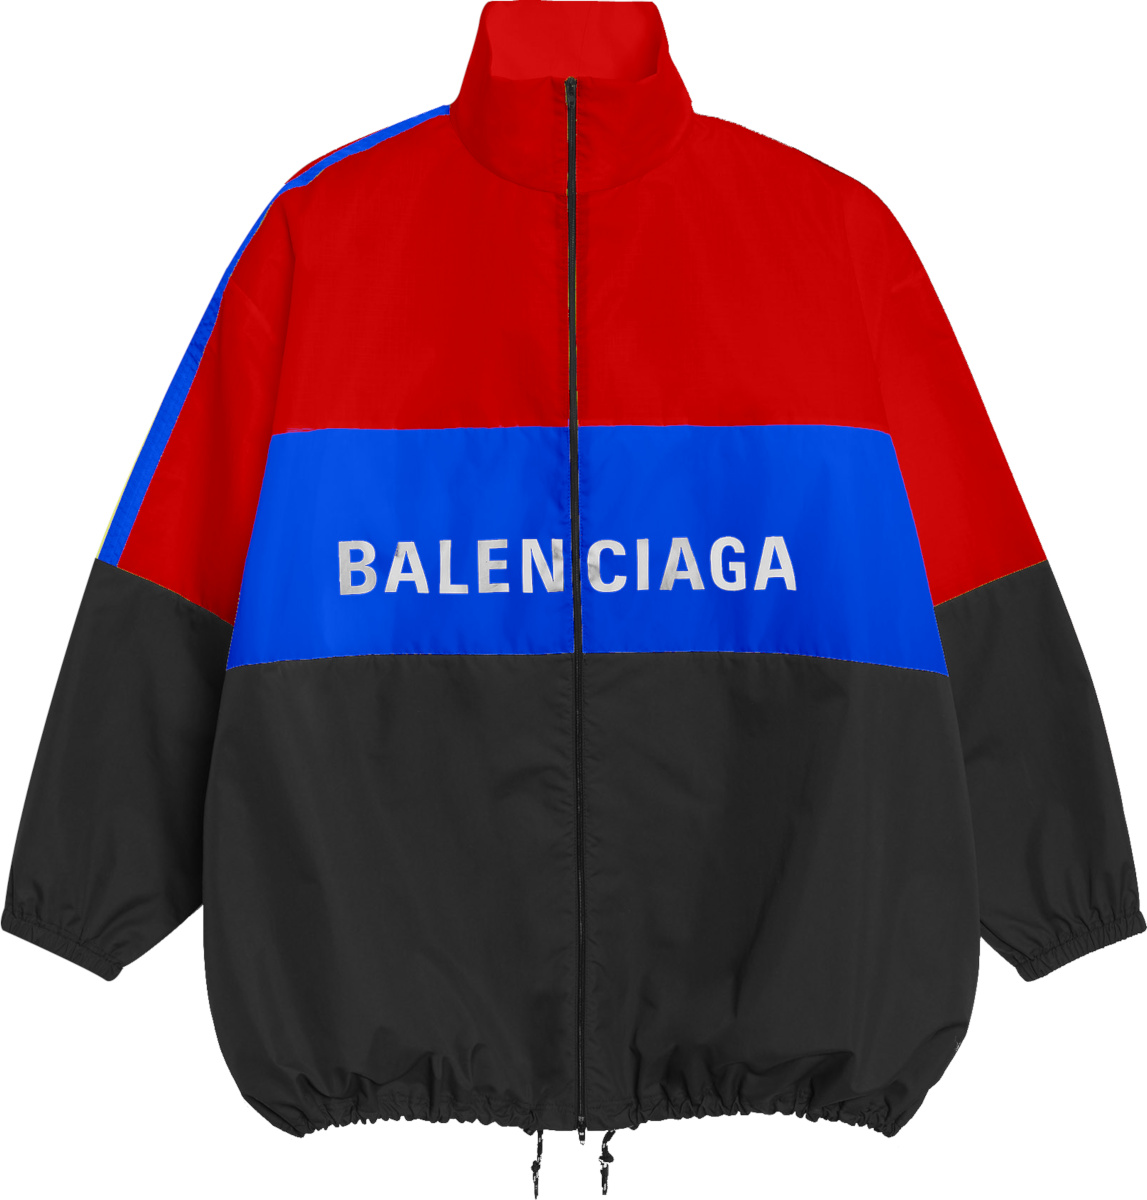 Balenciaga Red, Blue, & Black Colorblock Jacket | Incorporated Style